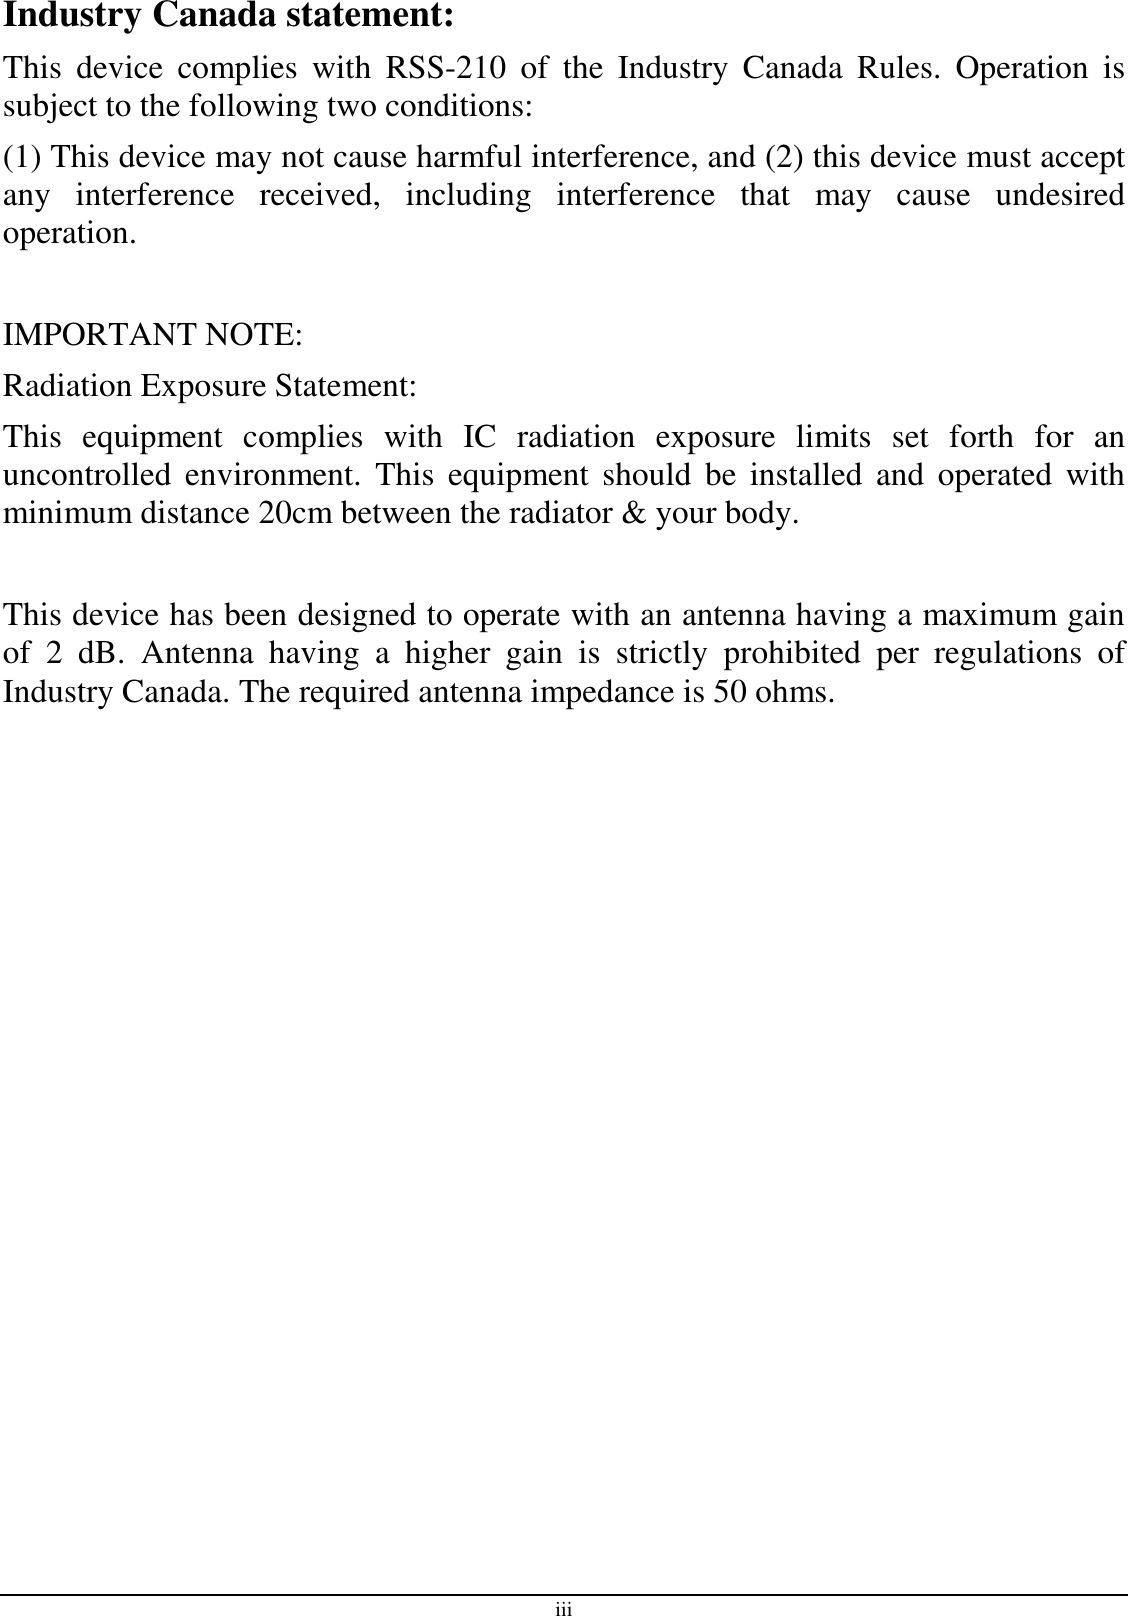 iii Industry Canada statement: This  device  complies  with  RSS-210  of  the  Industry  Canada  Rules.  Operation  is subject to the following two conditions:  (1) This device may not cause harmful interference, and (2) this device must accept any  interference  received,  including  interference  that  may  cause  undesired operation.  IMPORTANT NOTE: Radiation Exposure Statement: This  equipment  complies  with  IC  radiation  exposure  limits  set  forth  for  an uncontrolled  environment.  This  equipment should  be  installed  and  operated with minimum distance 20cm between the radiator &amp; your body.  This device has been designed to operate with an antenna having a maximum gain of  2  dB.  Antenna  having  a  higher  gain  is  strictly  prohibited  per  regulations  of Industry Canada. The required antenna impedance is 50 ohms.  